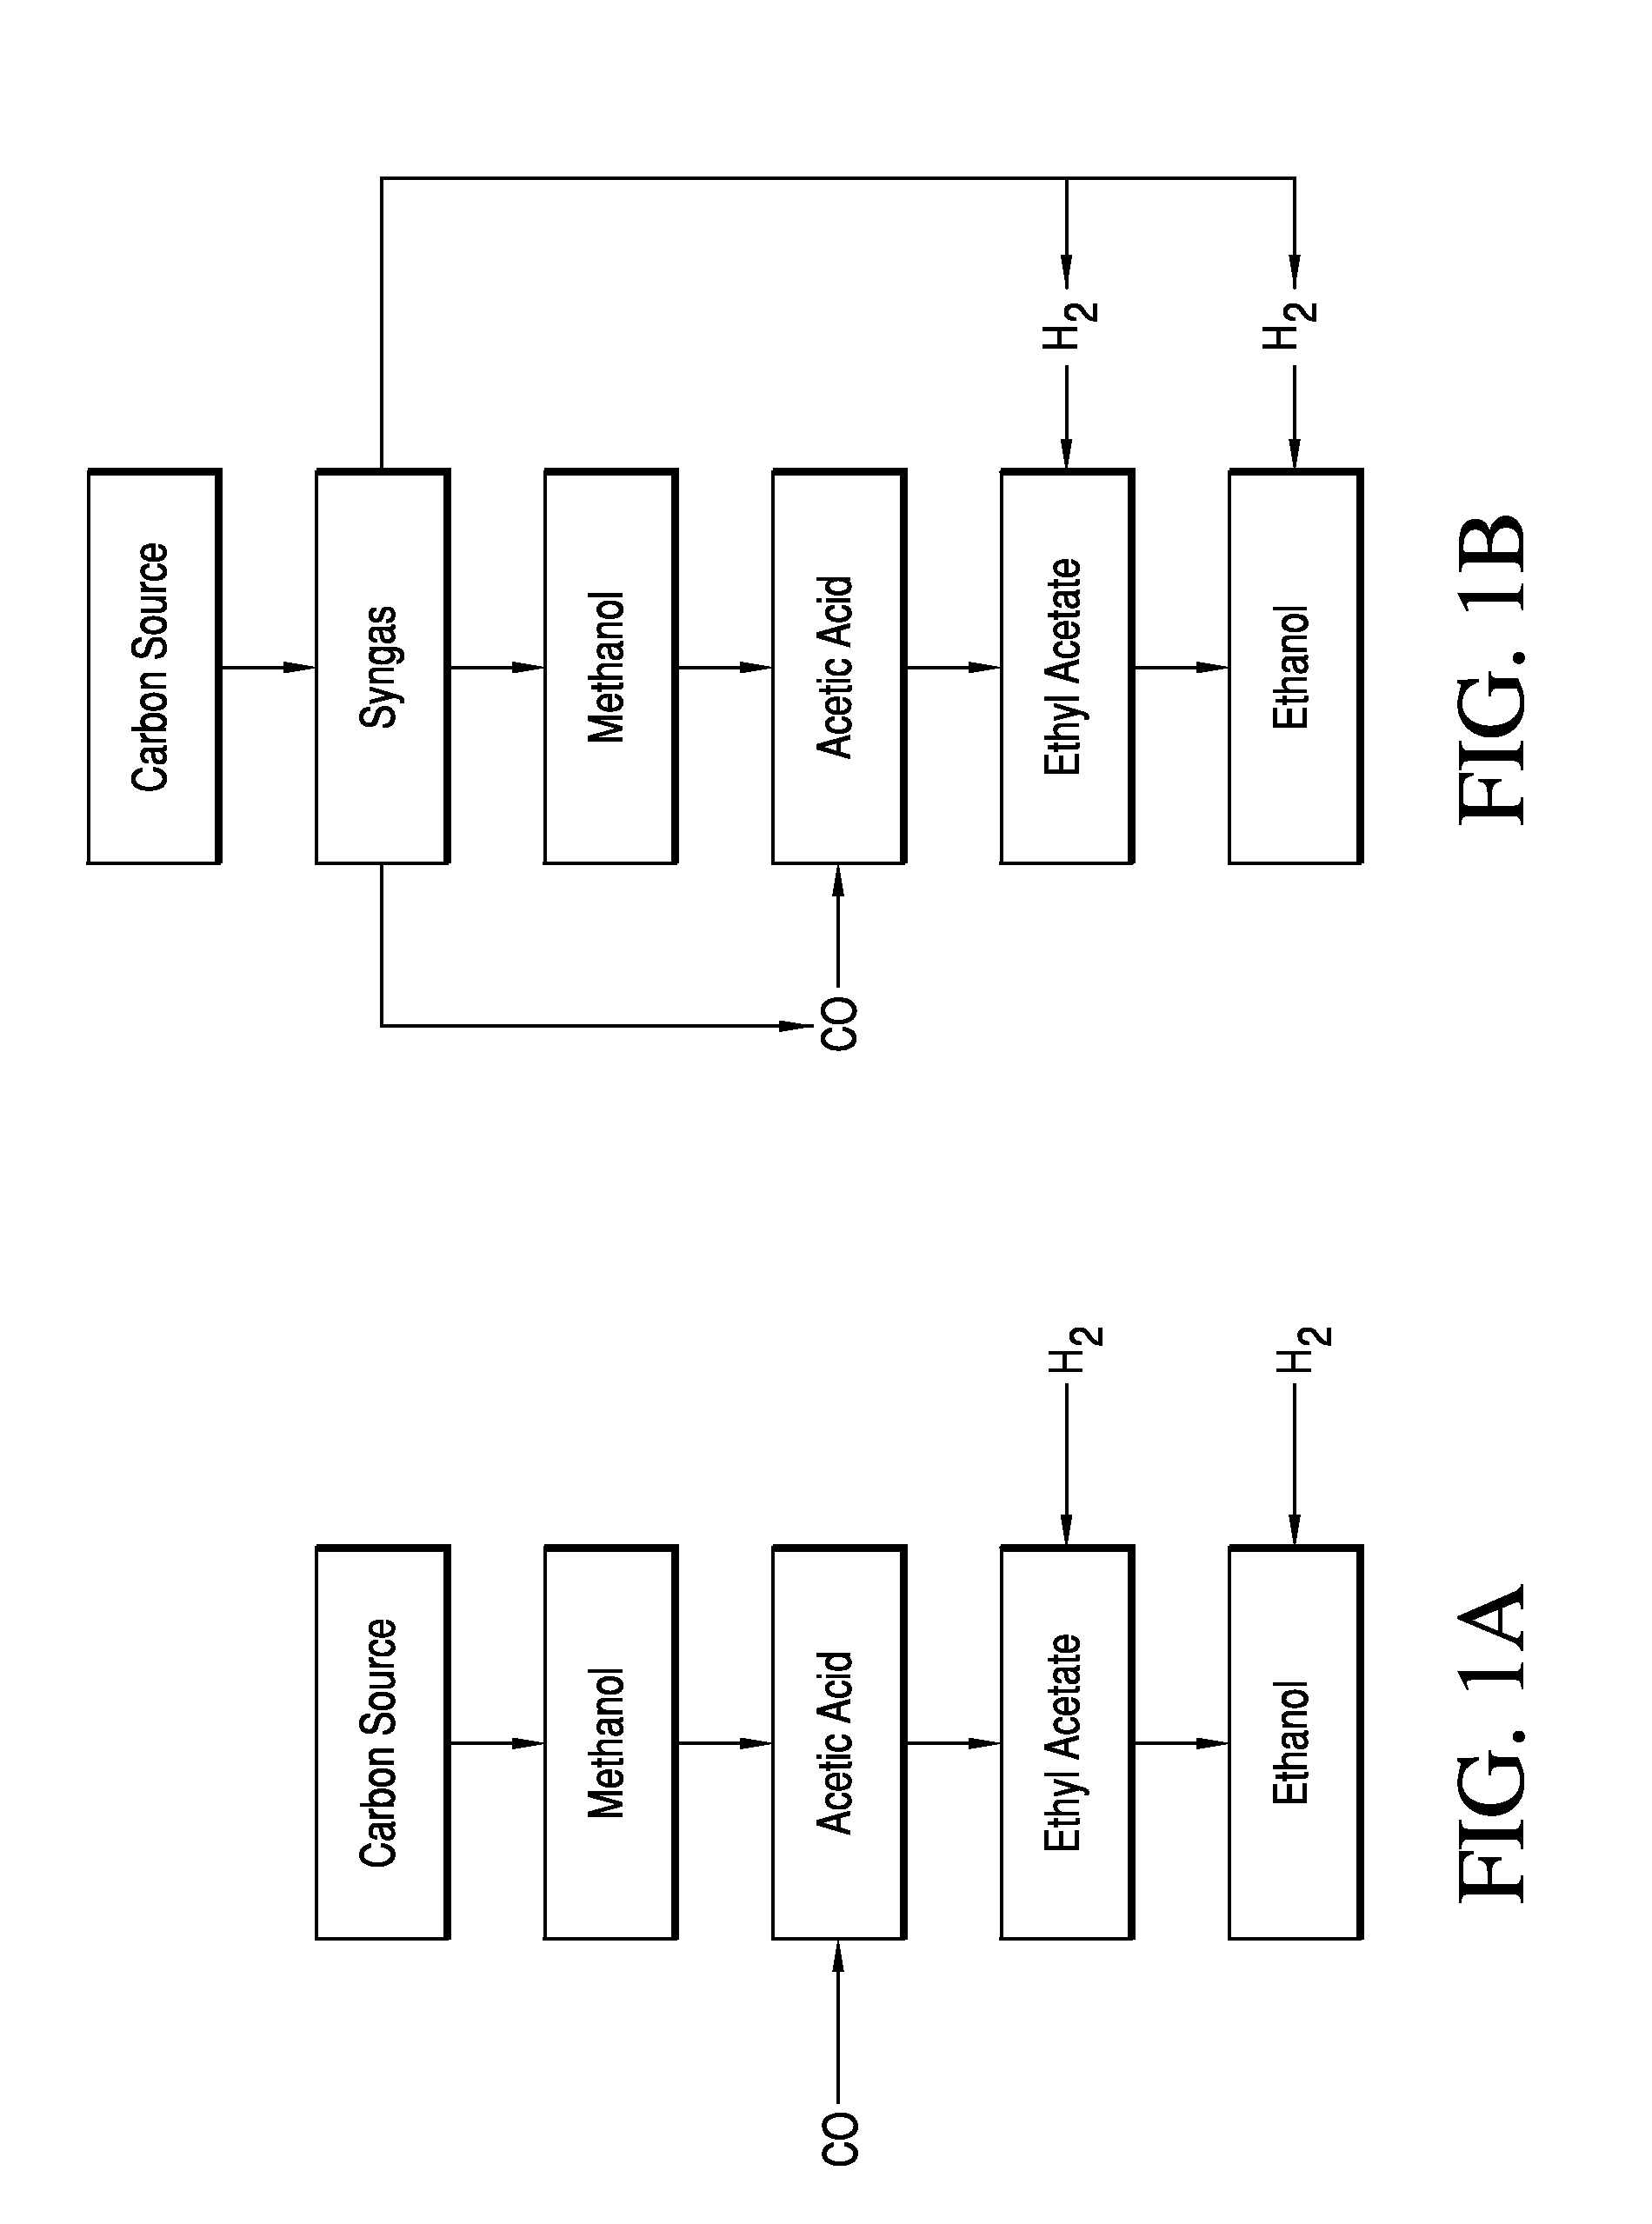 Phasing Reactor Product from Hydrogenating Acetic Acid Into Ethyl Acetate Feed to Produce Ethanol